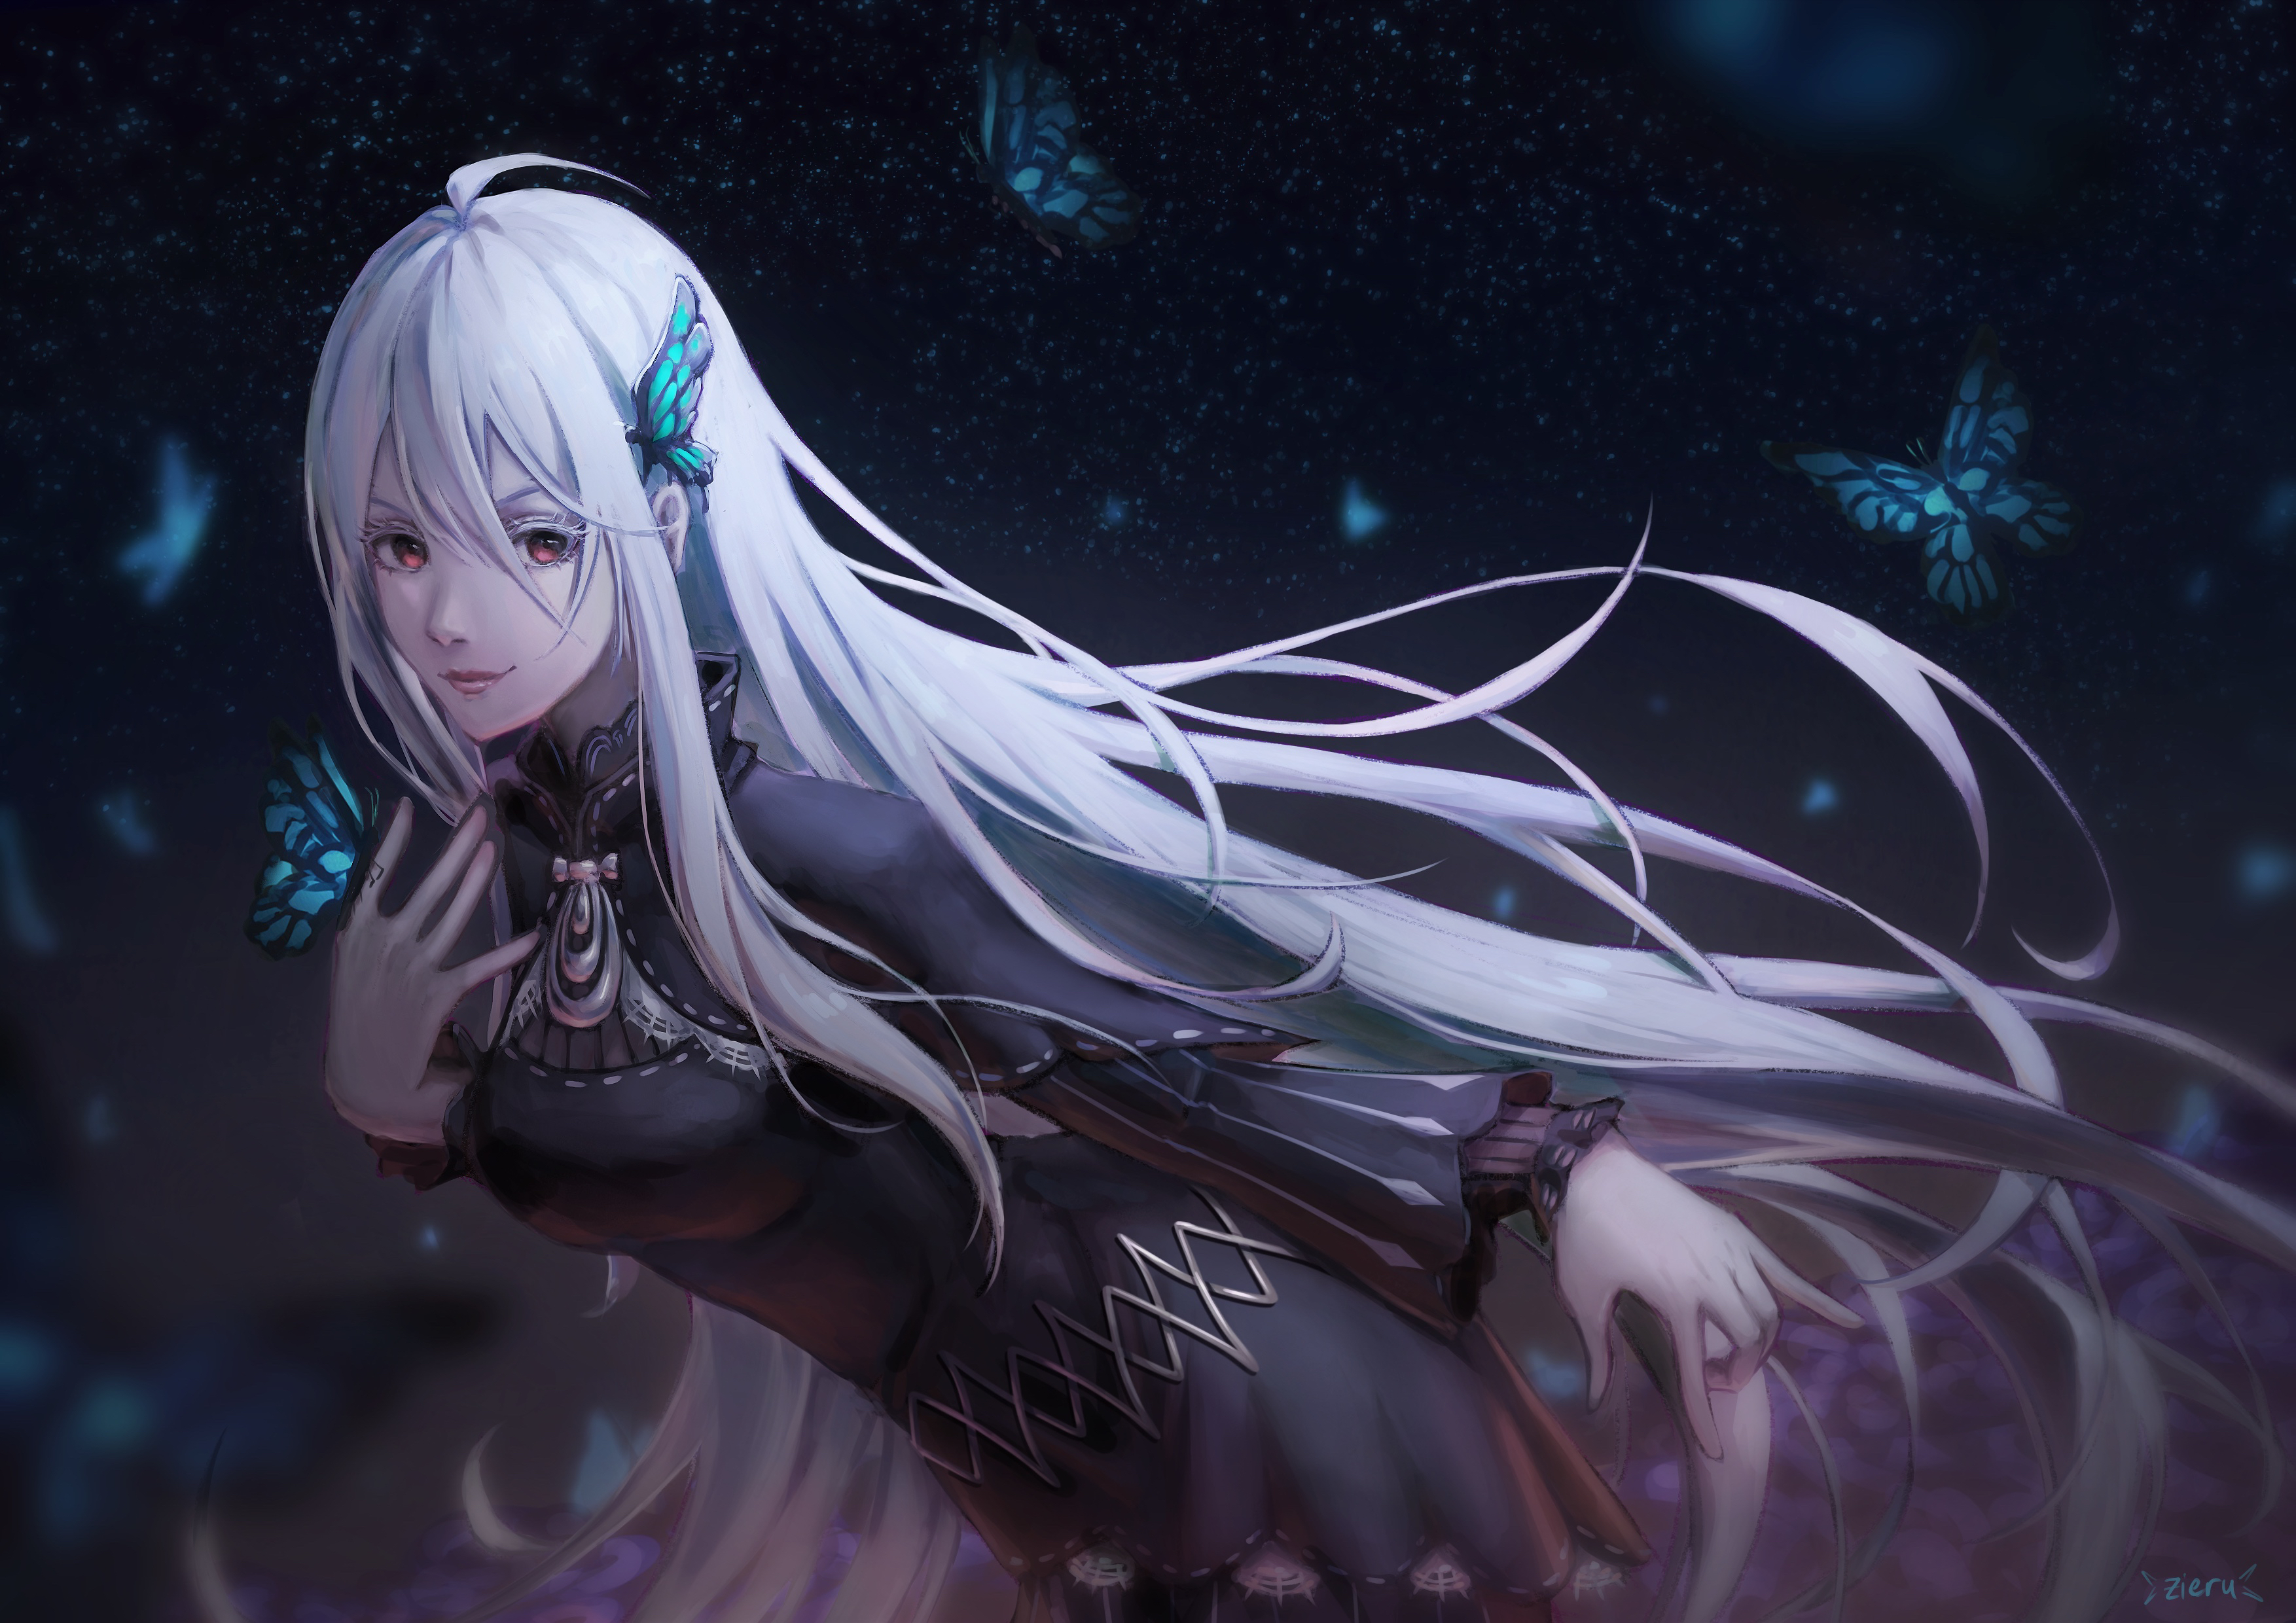 Anime 3508x2480 Re:Zero Kara Hajimeru Isekai Seikatsu witch black dress 2D butterfly hair ornament hair blowing in the wind anime girls Echidna (Re:Zero Kara Hajimeru Isekai Seikatsu) striped dress long hair white hair ahoge anime smiling looking at viewer red eyes fan art long sleeves curvy arched back starry night